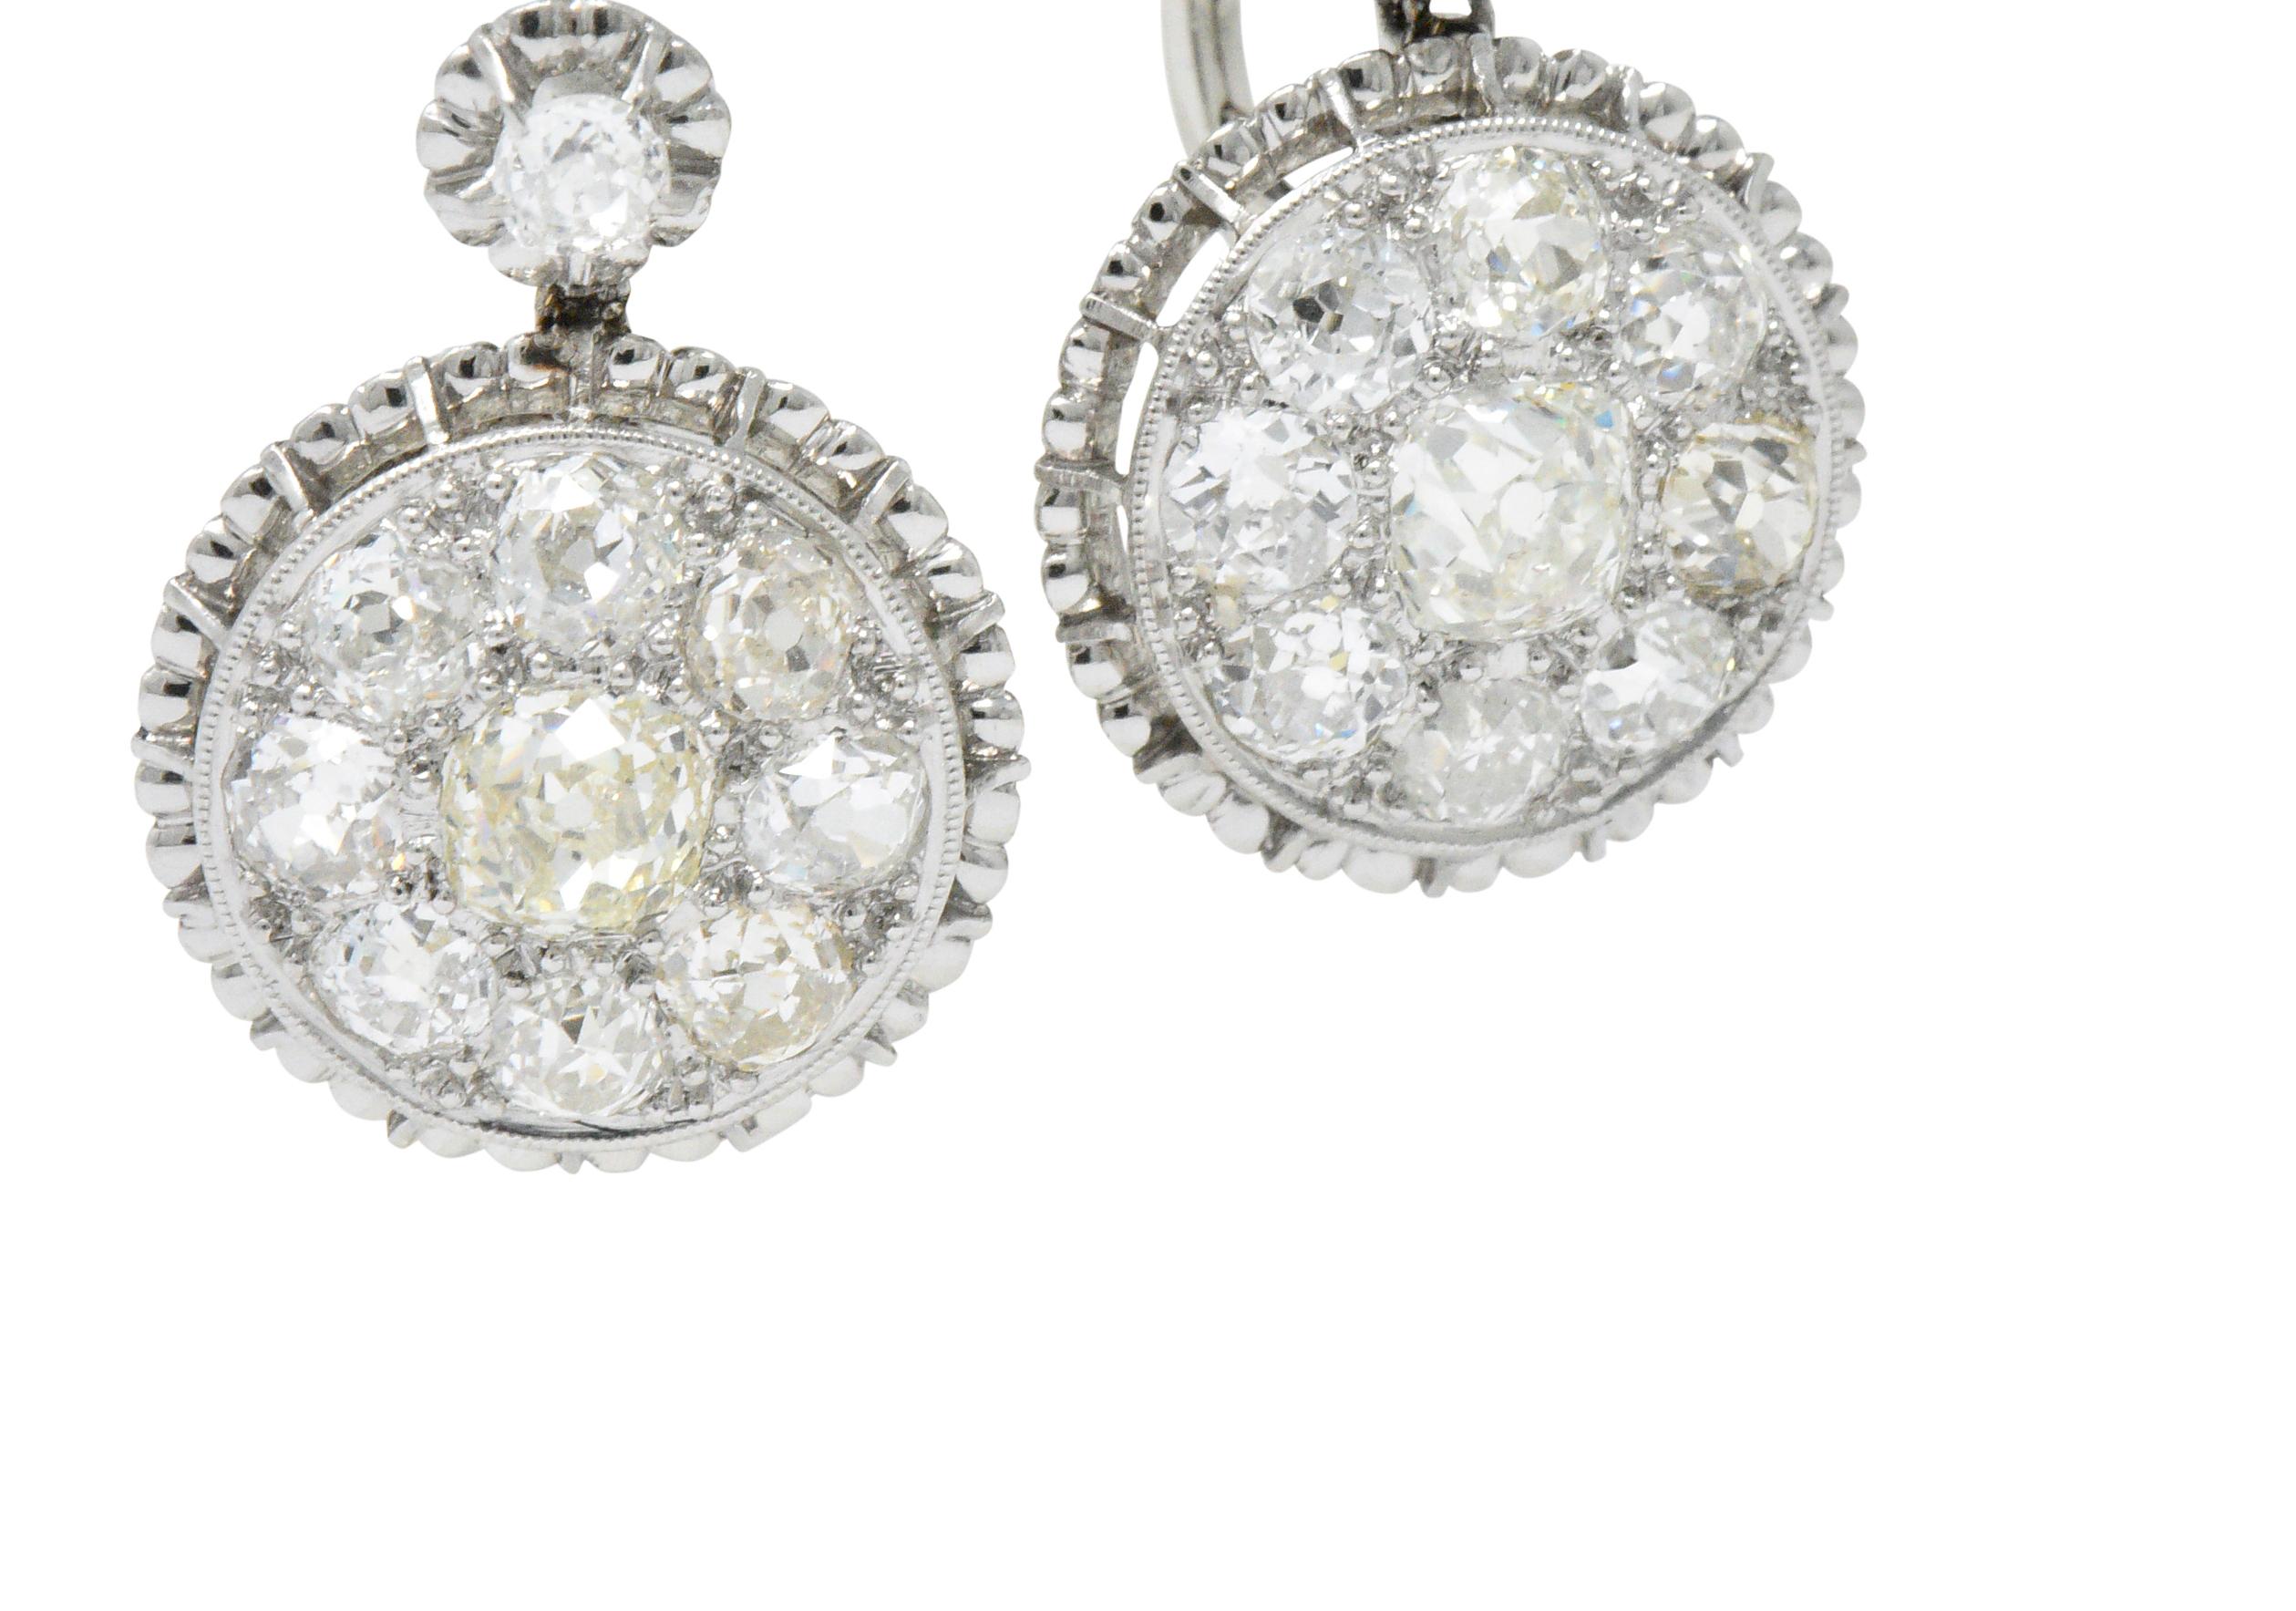 Featuring diamond surmount with suspended articulated diamond cluster

Set with old mine cut diamonds weighing approximately 4.09 carats total, I to M color and VS to SI2 clarity 

Pierced, scalloped platinum frames

With 14 karat white gold lever